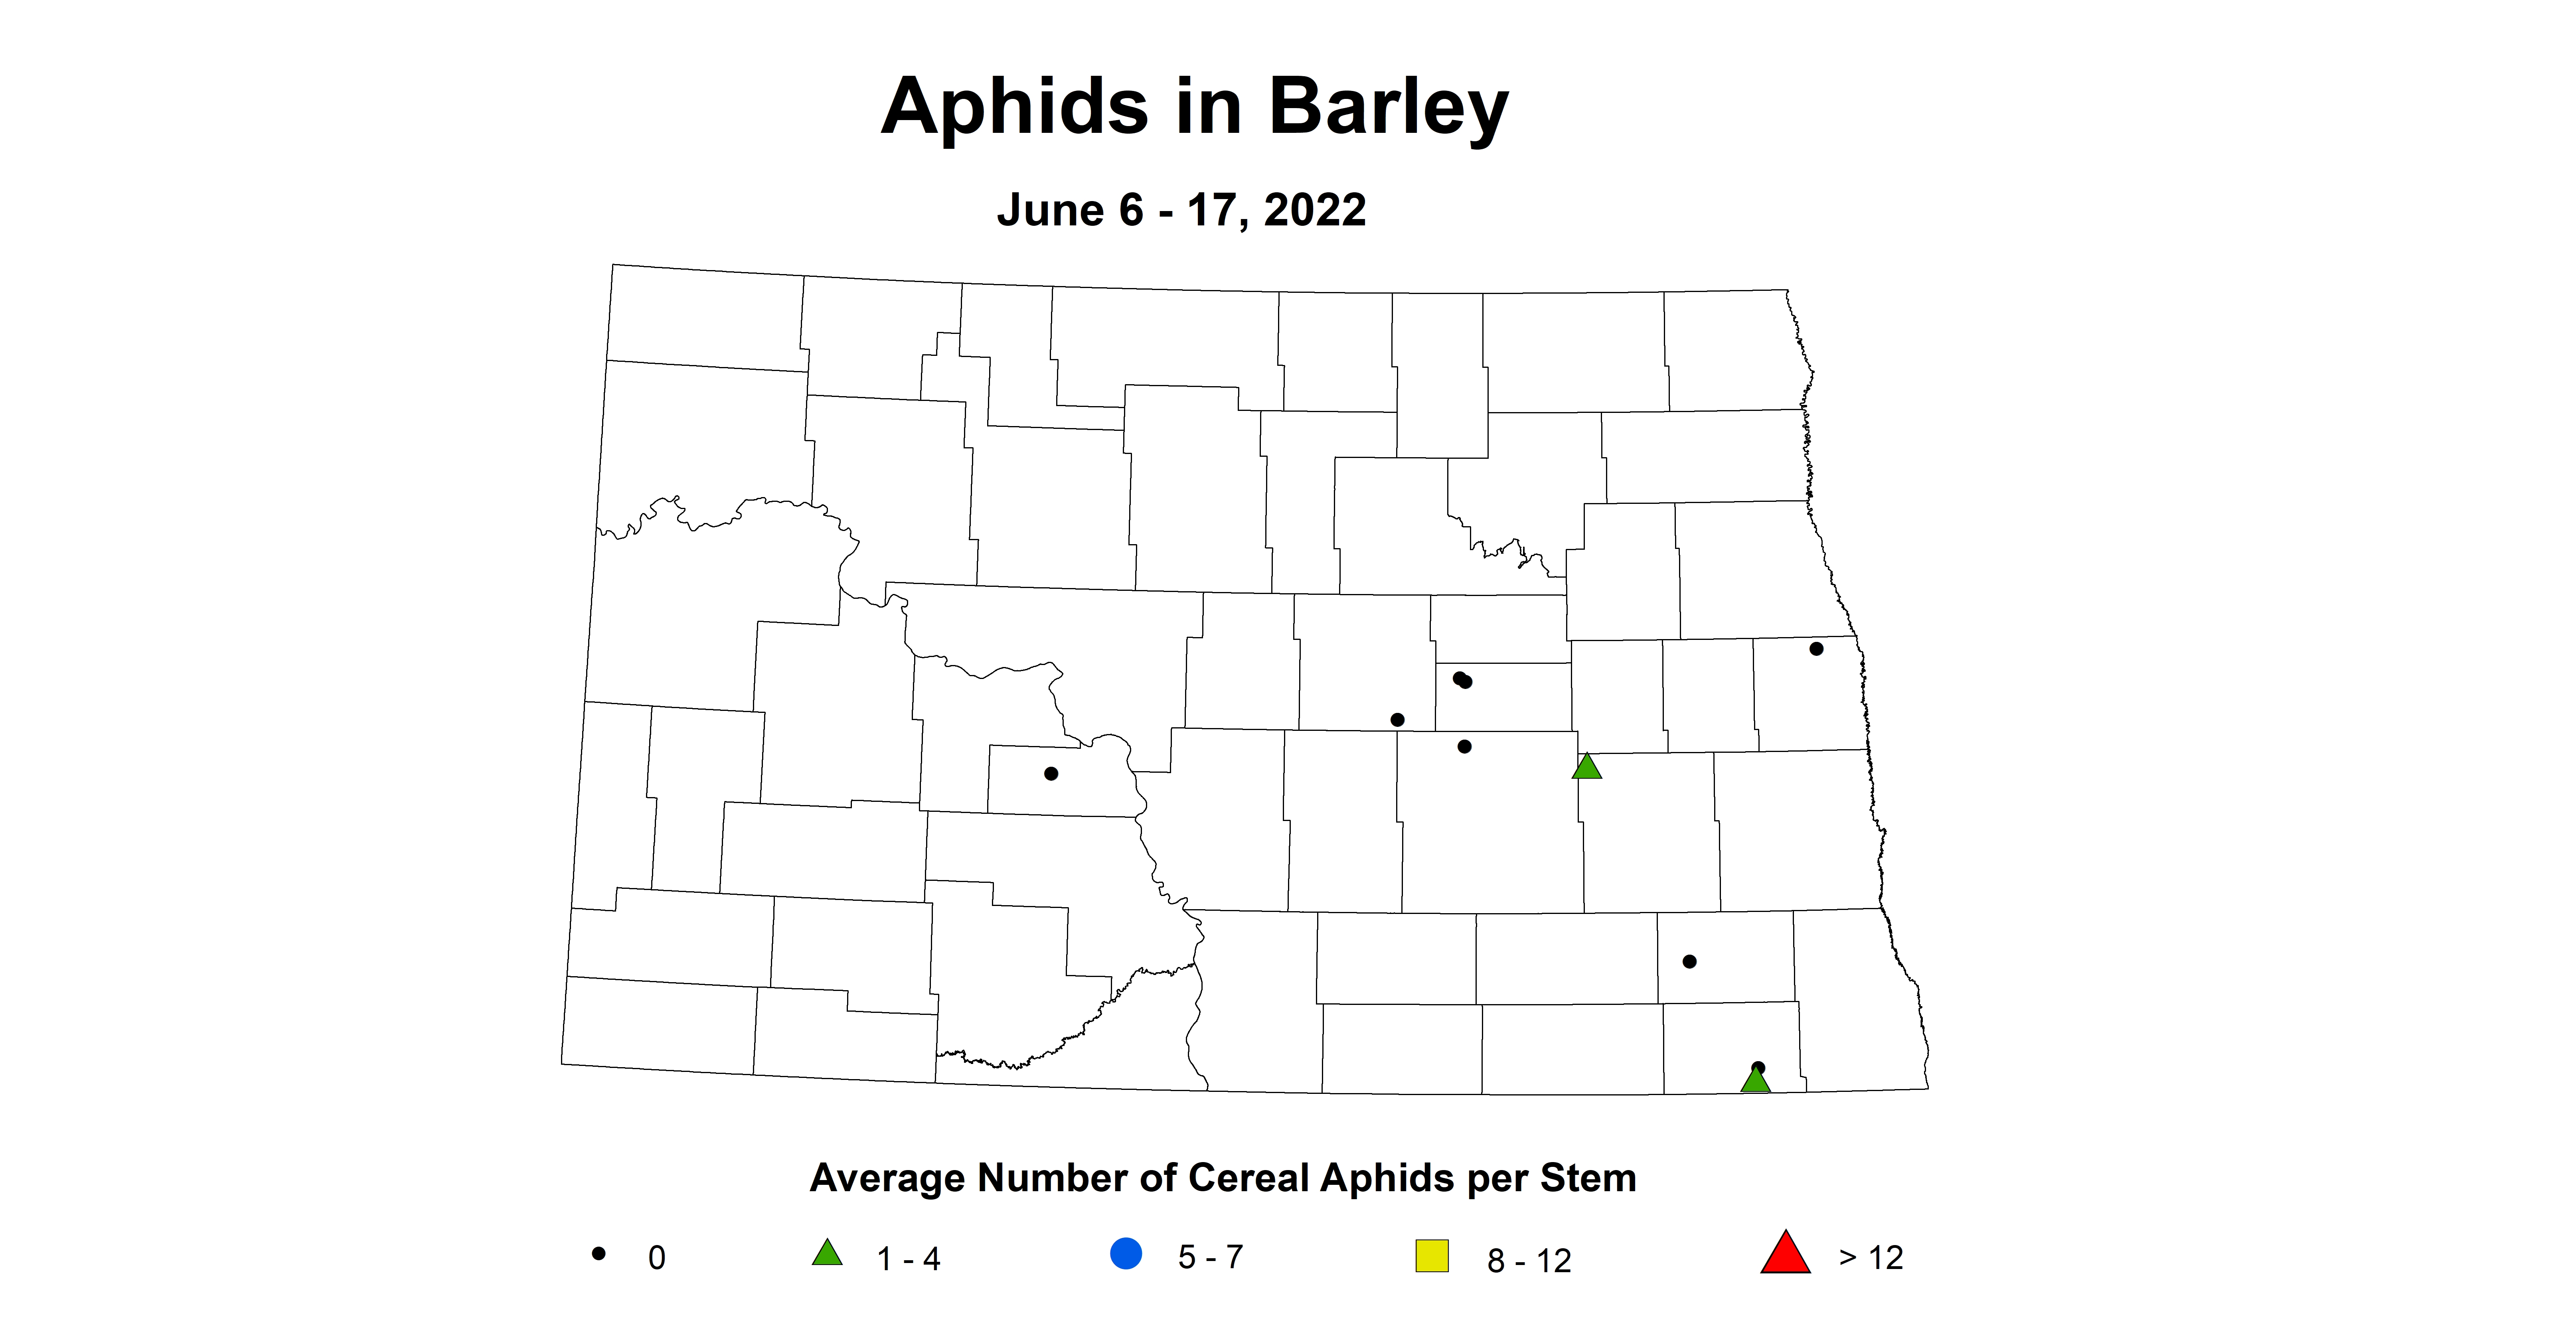 ND IPM map of Barley Aphids June 6-17, 2022